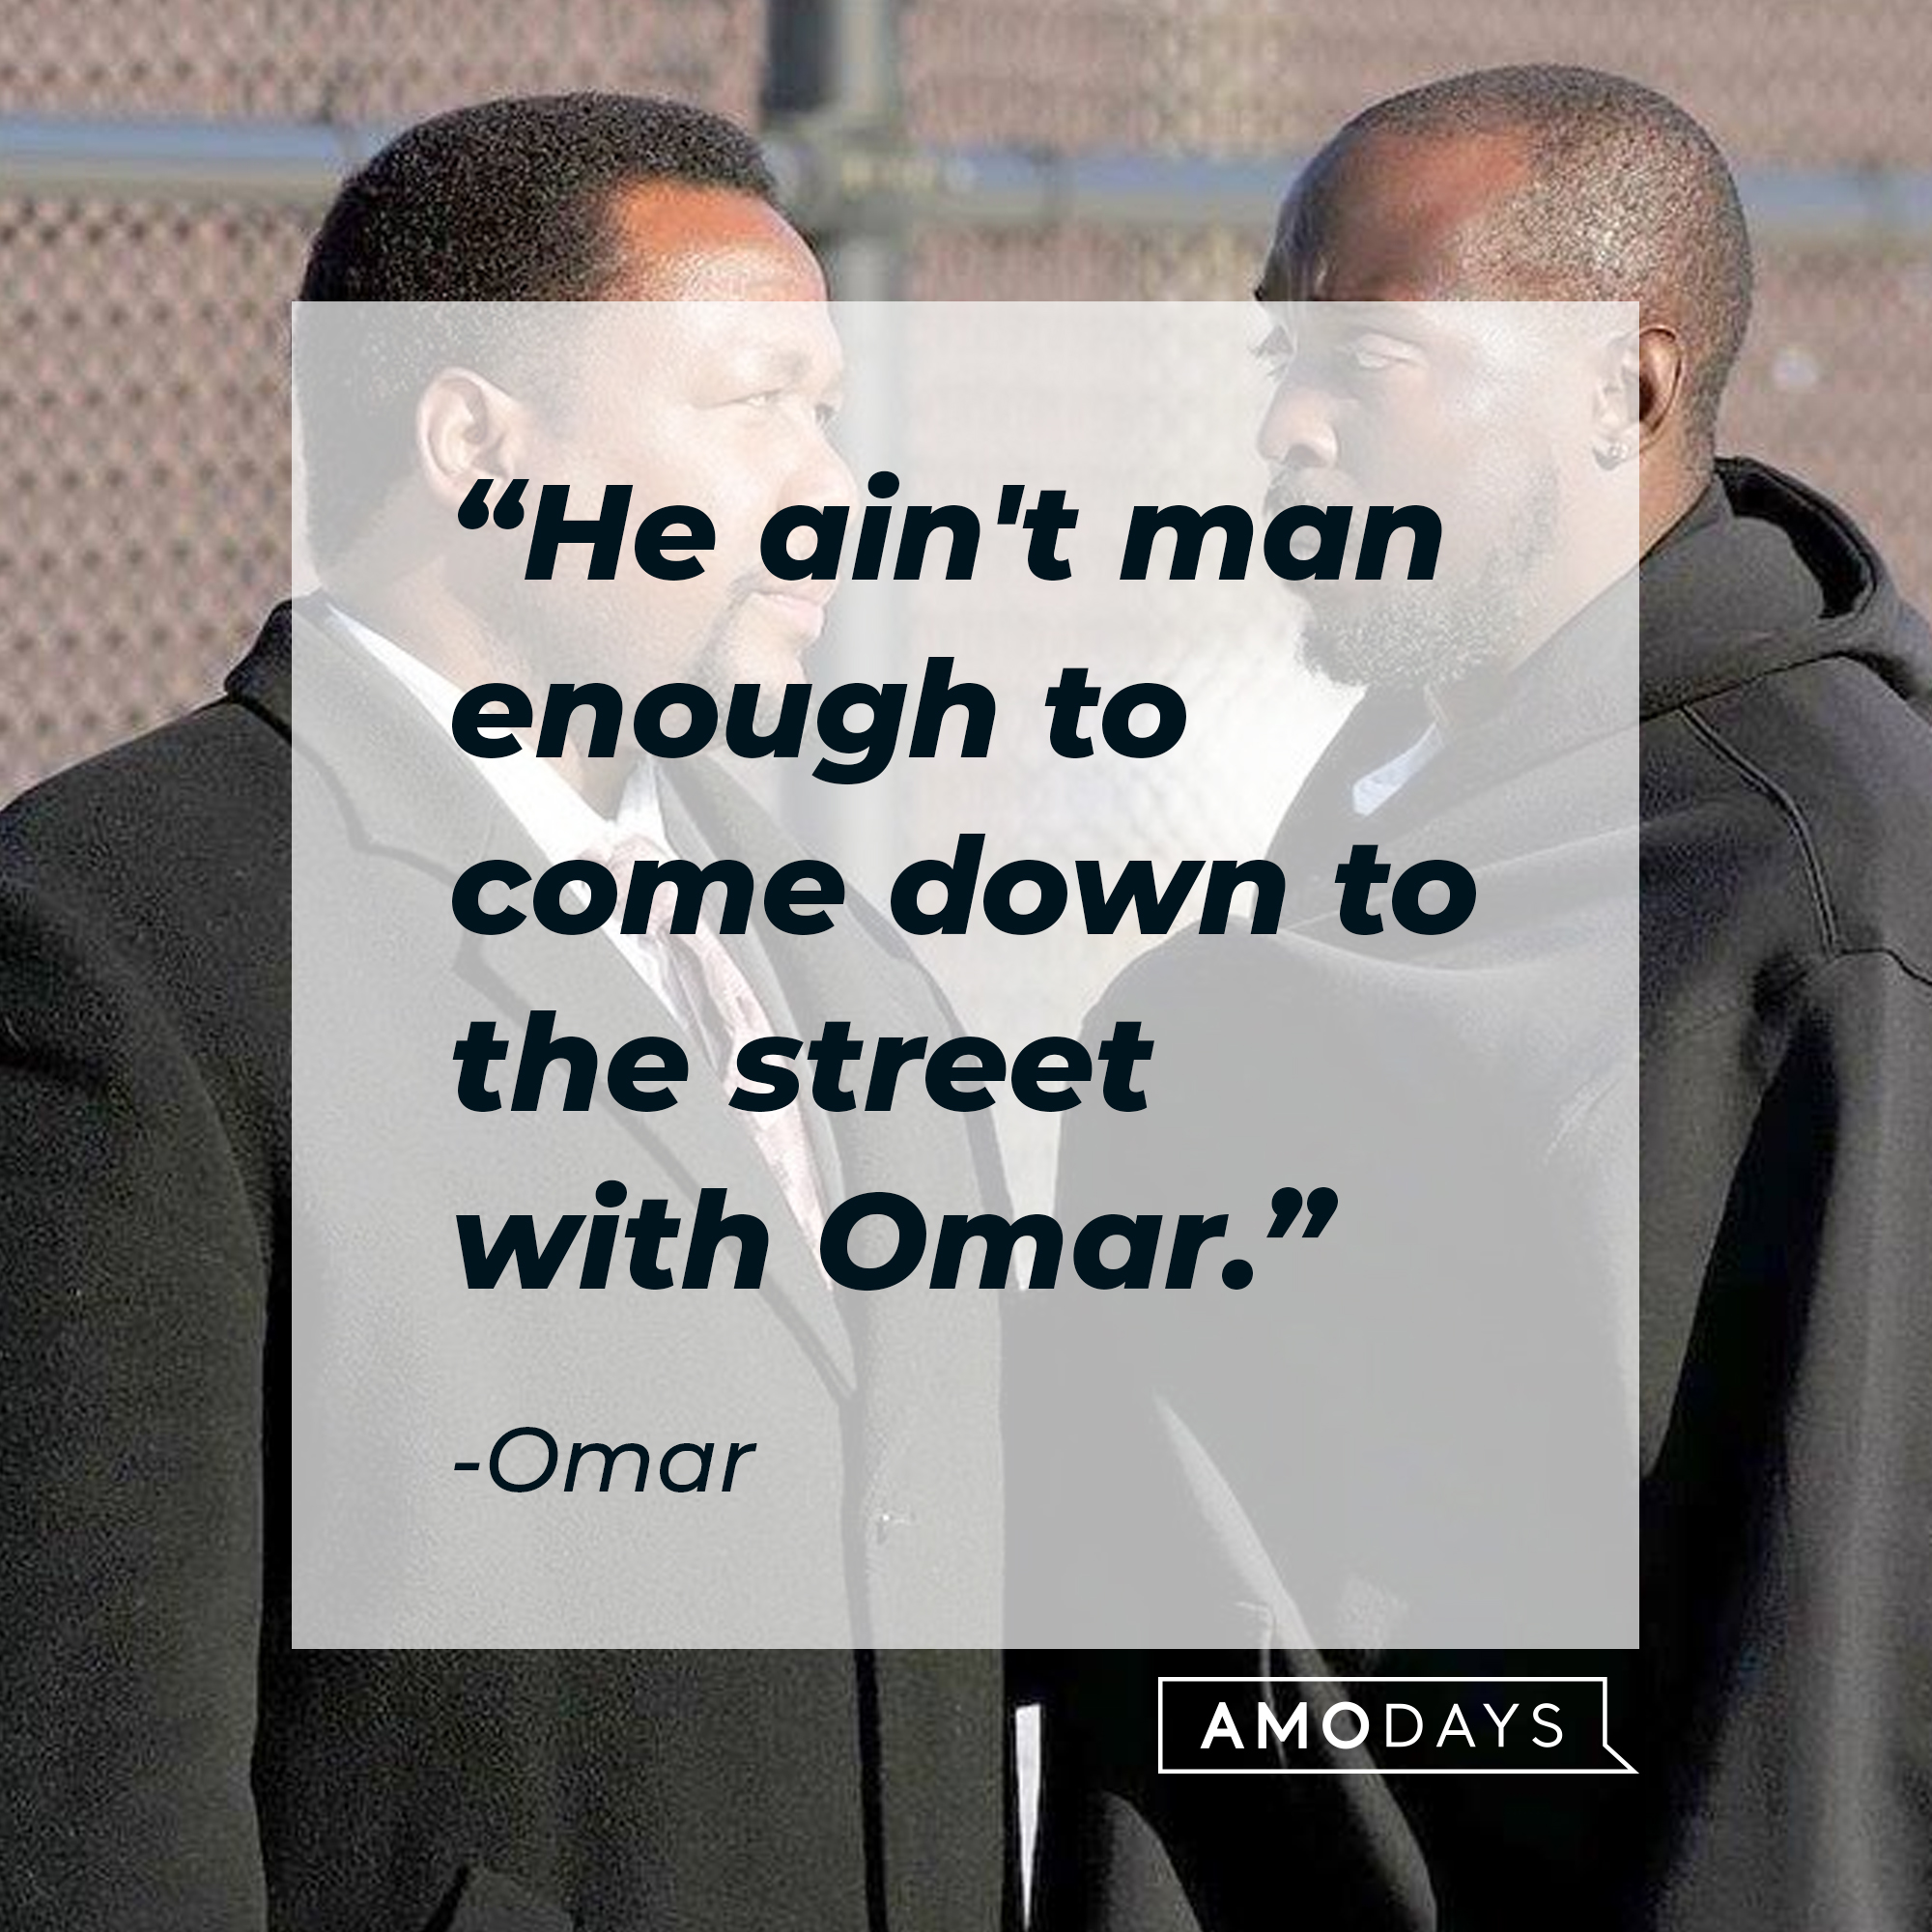 Omar's quote: "He ain't man enough to come down to the street with Omar." | Source: facebook.com/TheWire